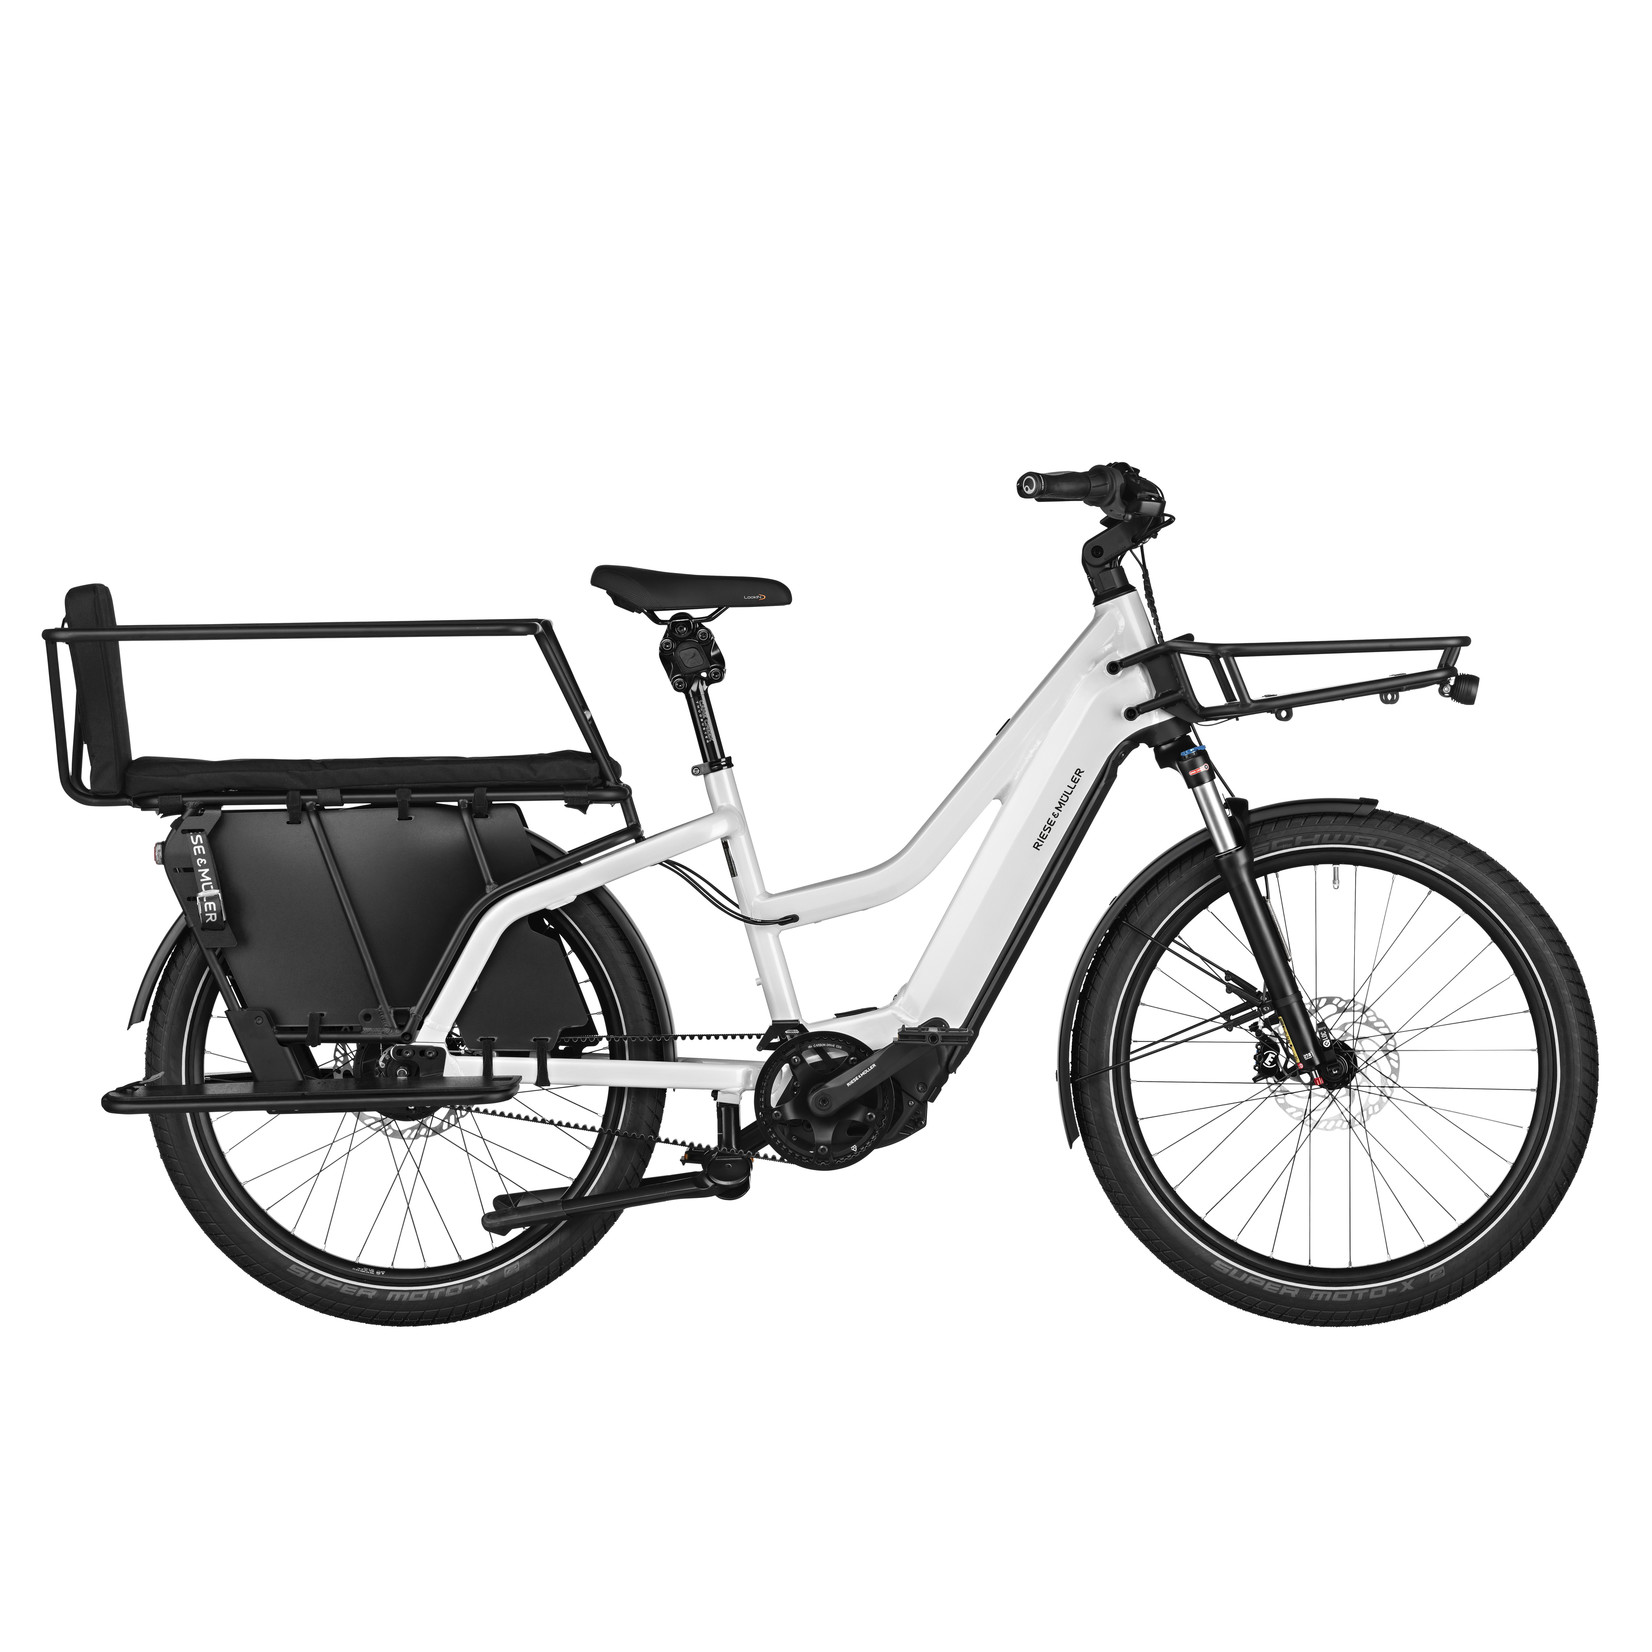 Riese & Mueller R&M Multicharger Mixte GT Vario DEMO White/47cm/Kiox/750Wh/Cargo Front Carrier/Safety Bar/Lock+Bag